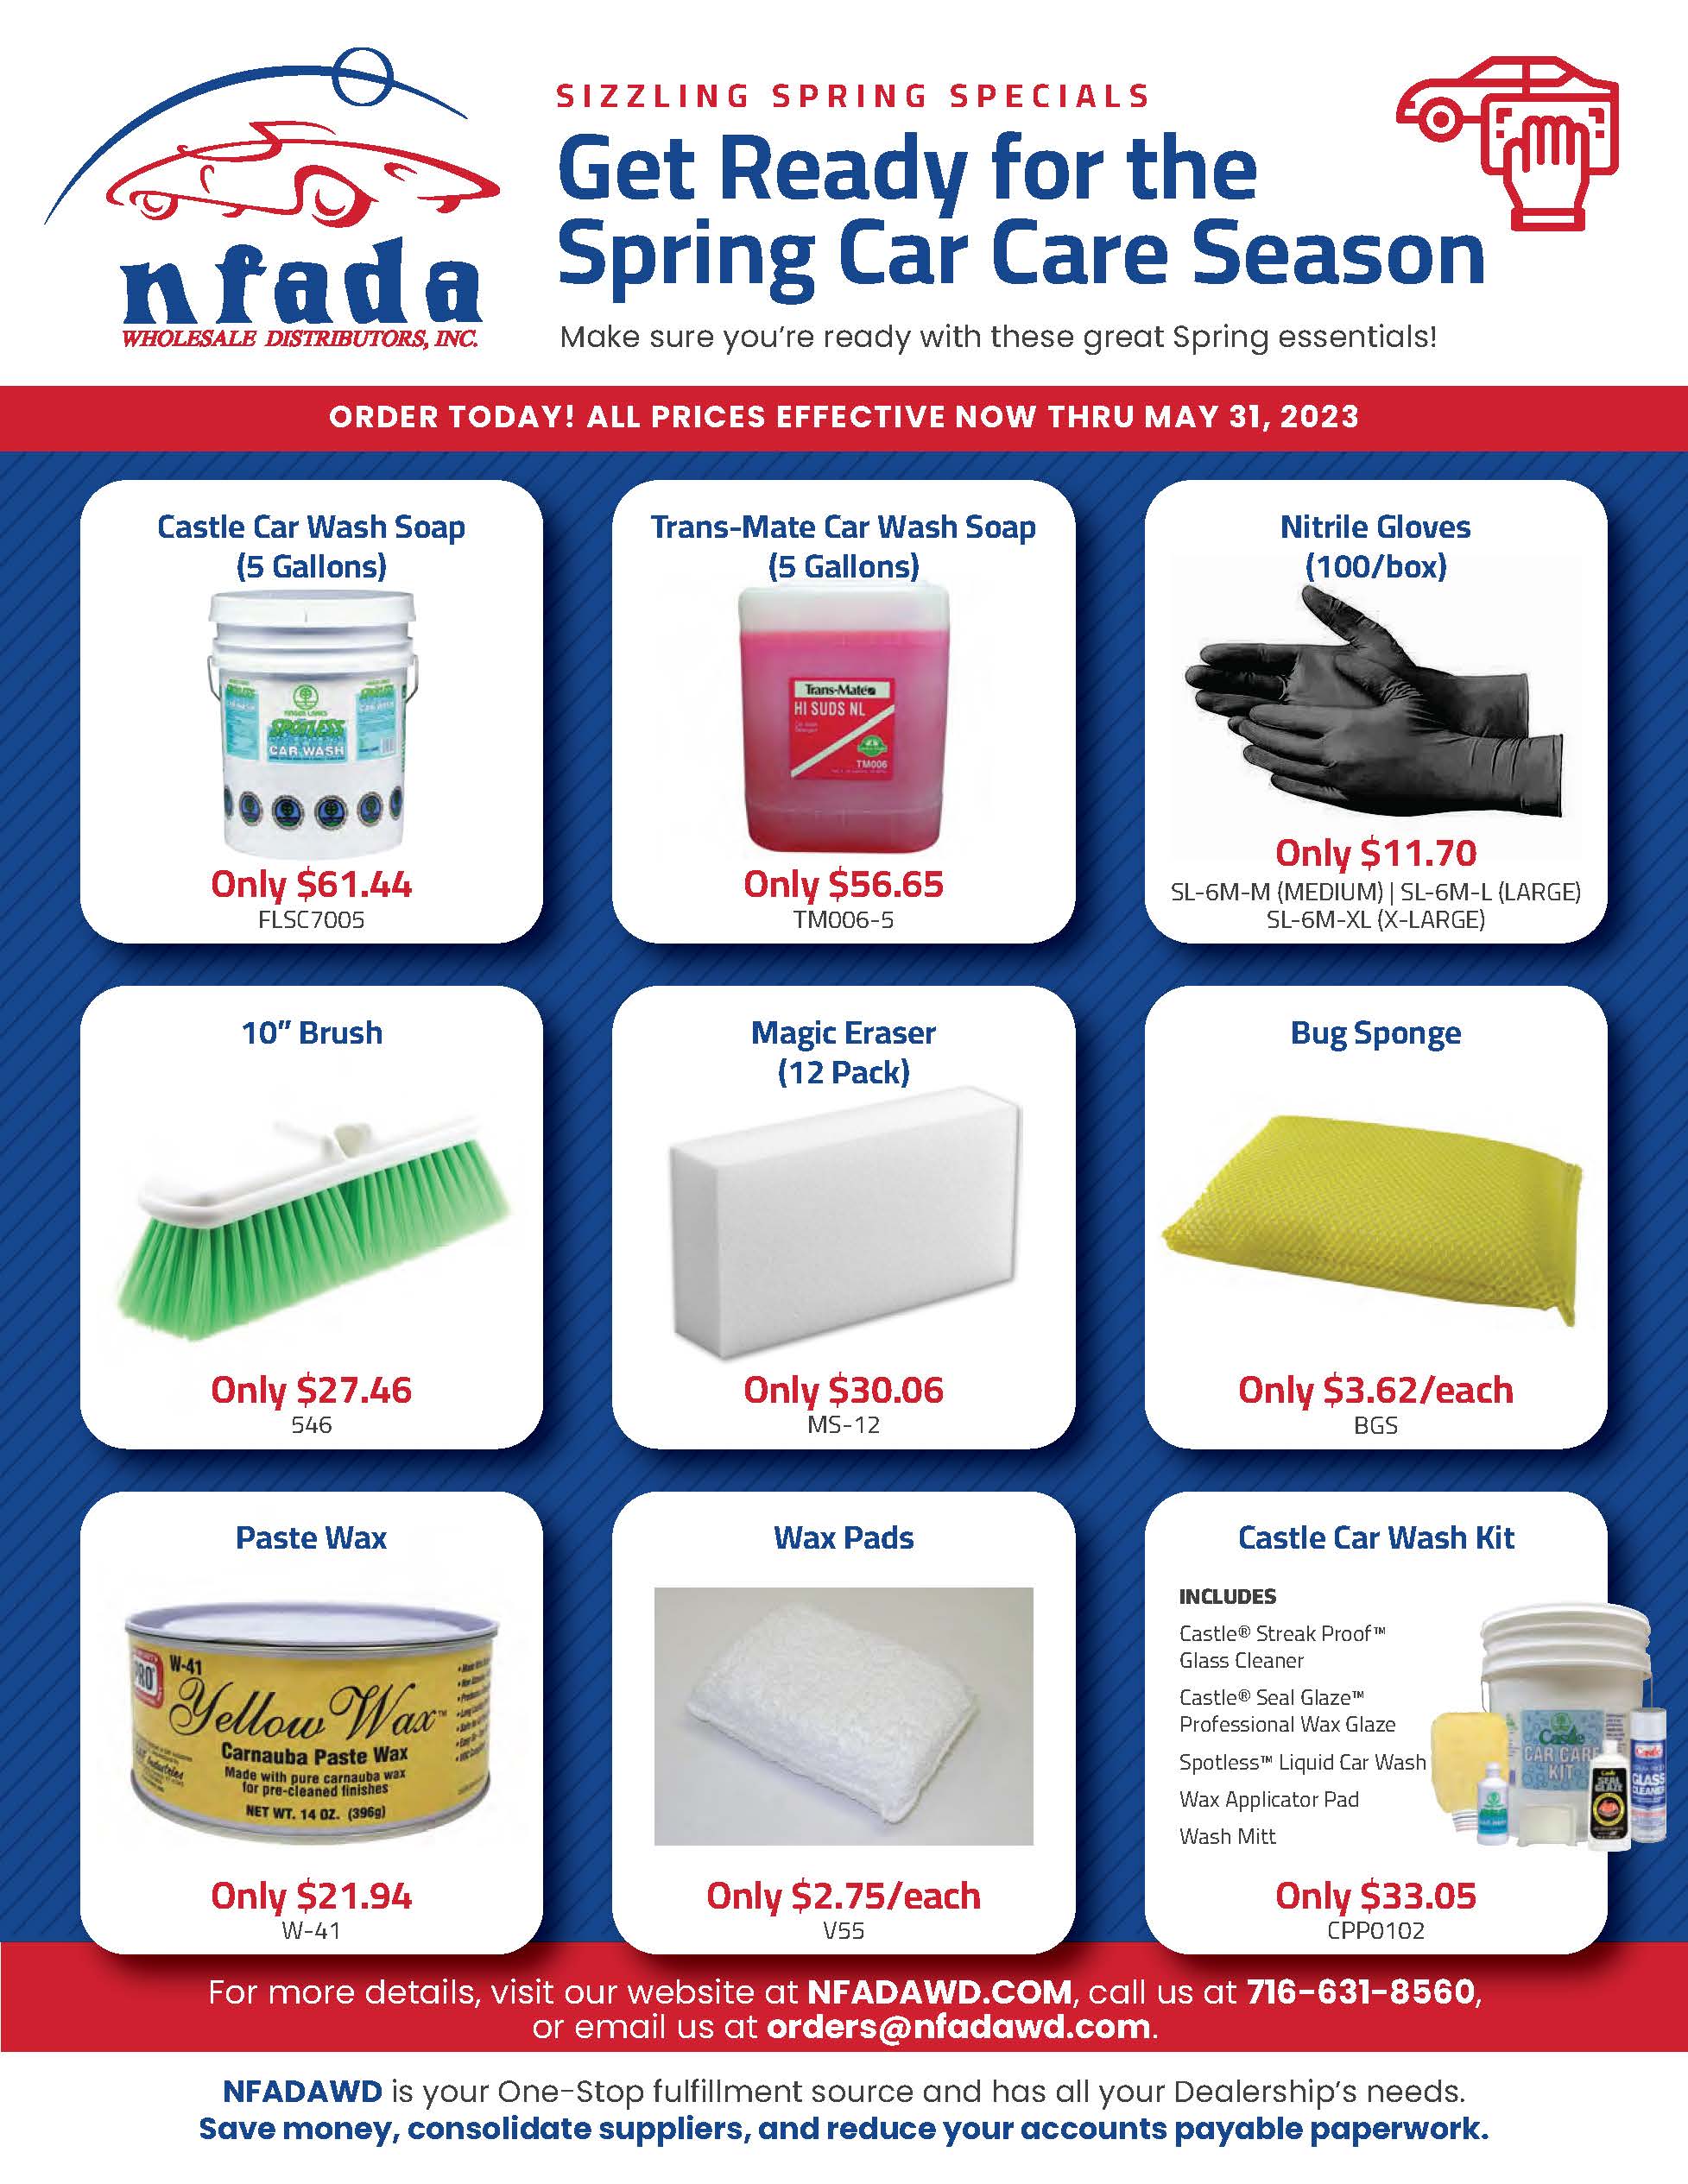 Get Ready for the Spring Car Care Season